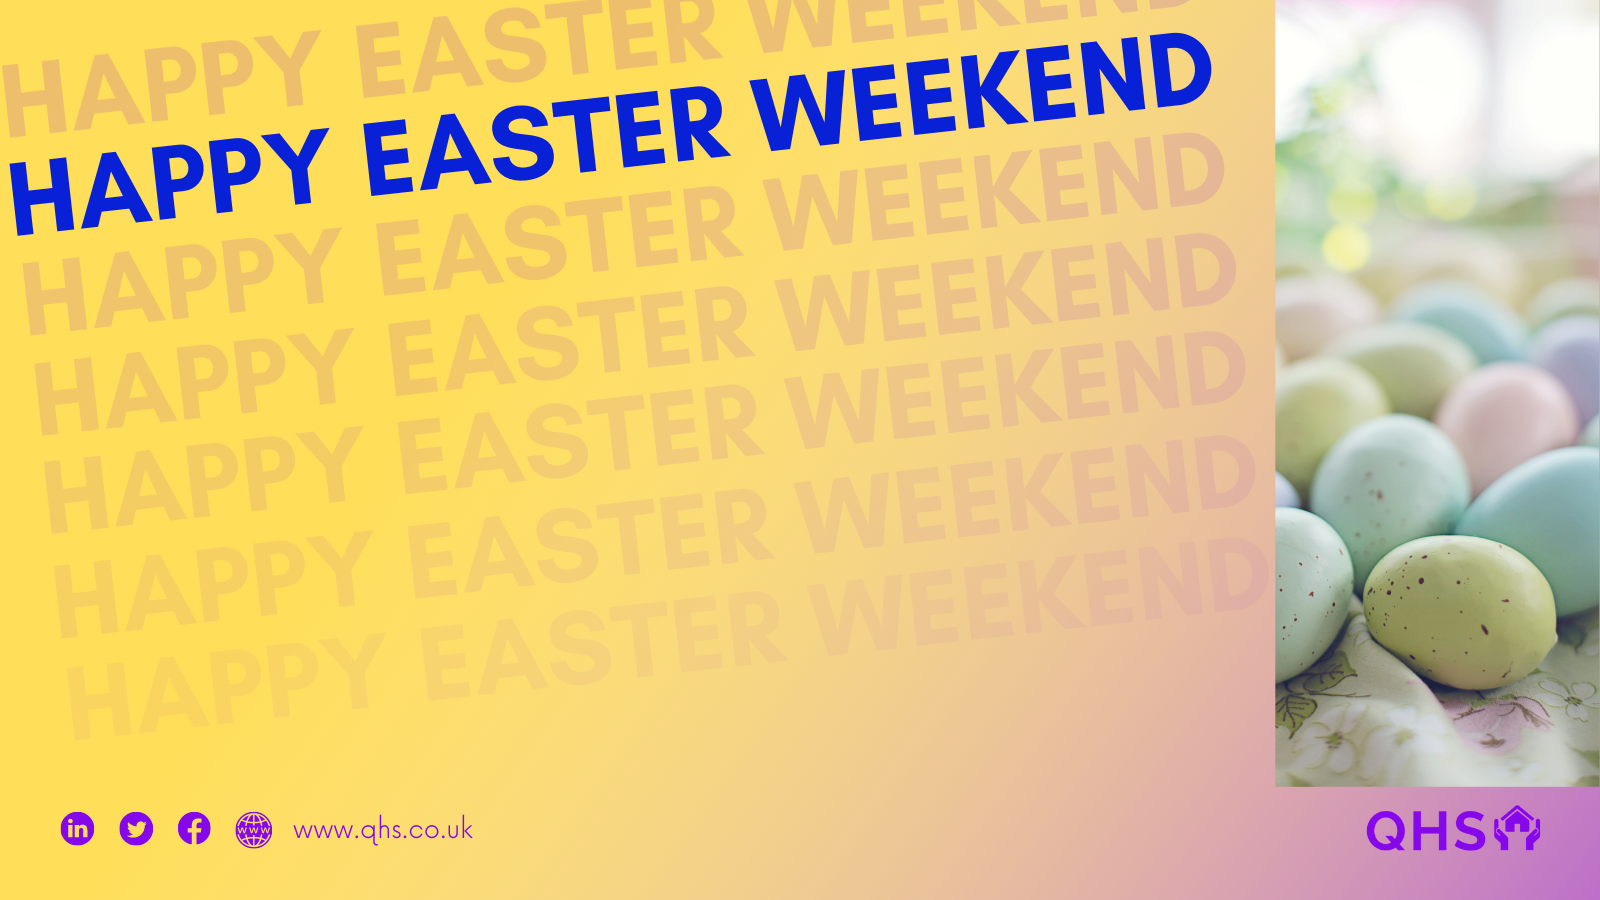 QHS Trusts You Had a Happy Easter Bank Holiday Weekend - News ¦¦ QHS